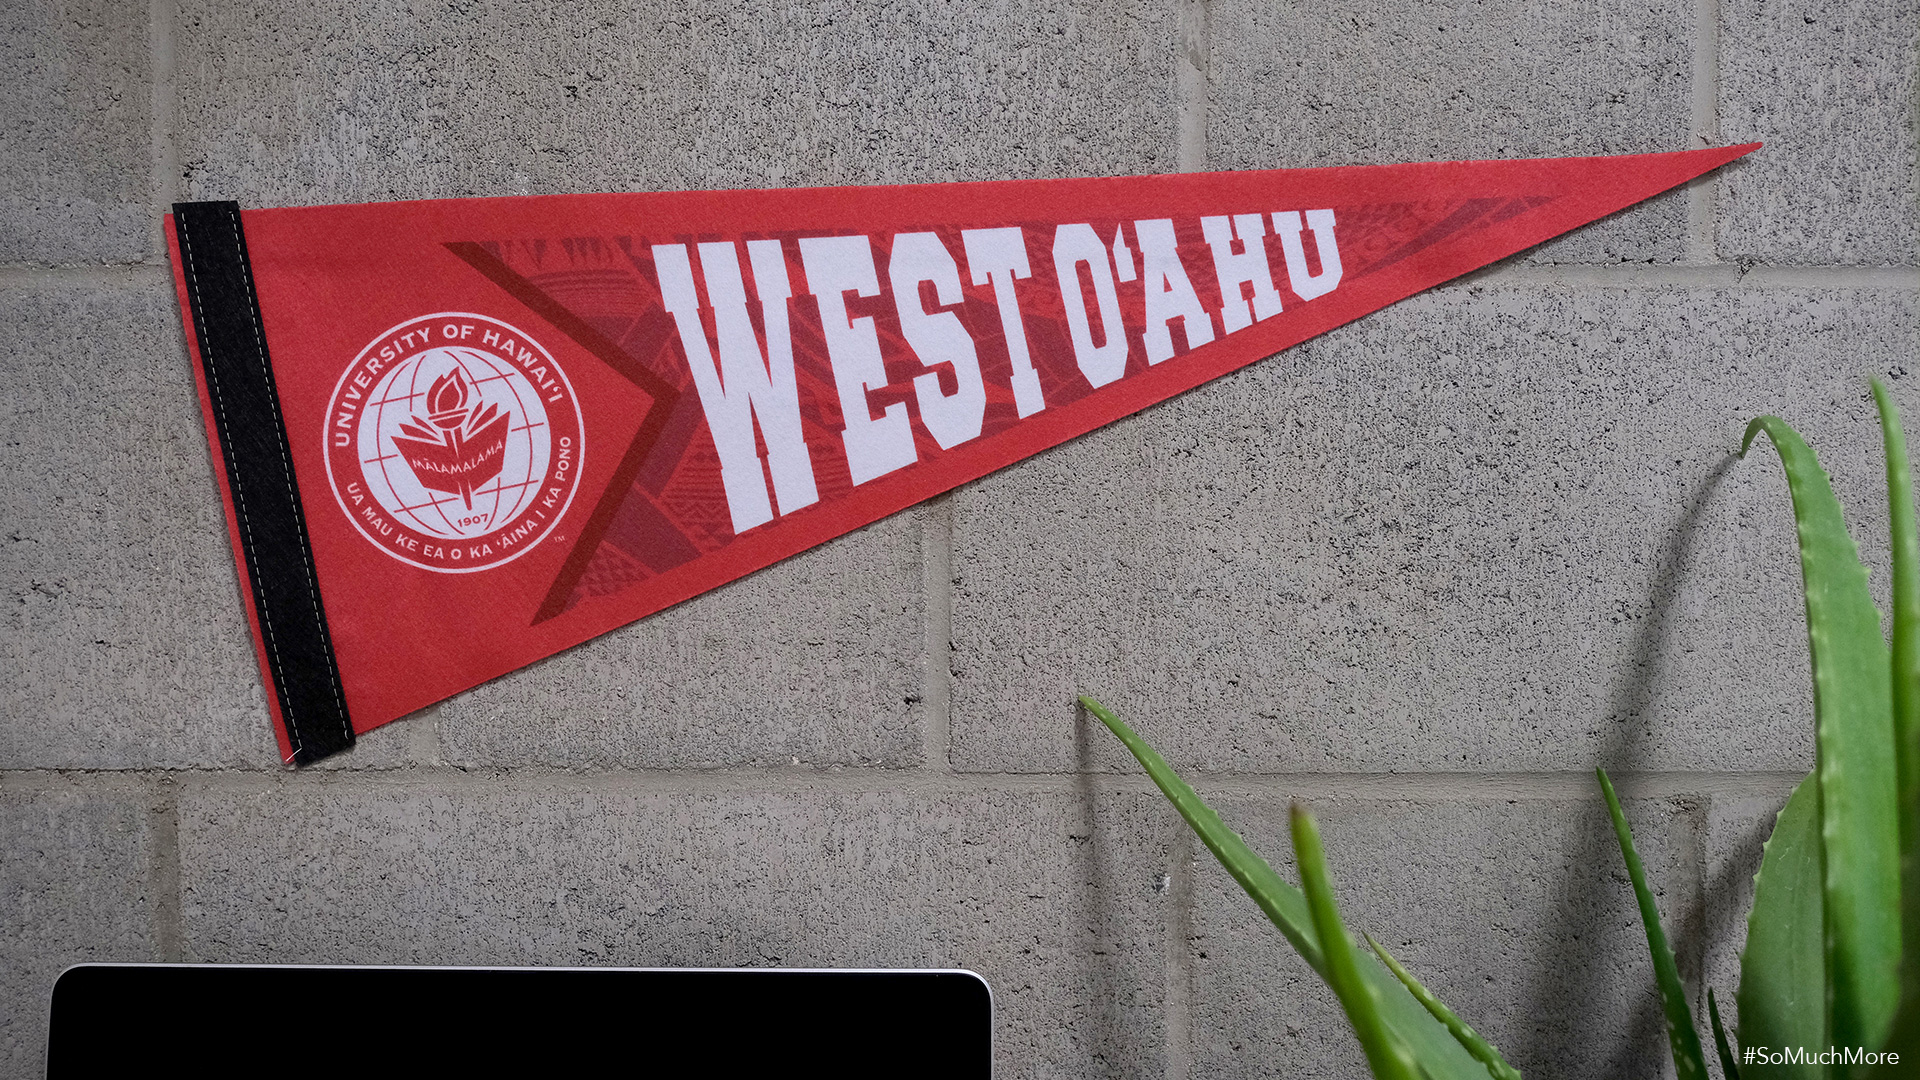 UH West Oahu pennant displayed on a wall.